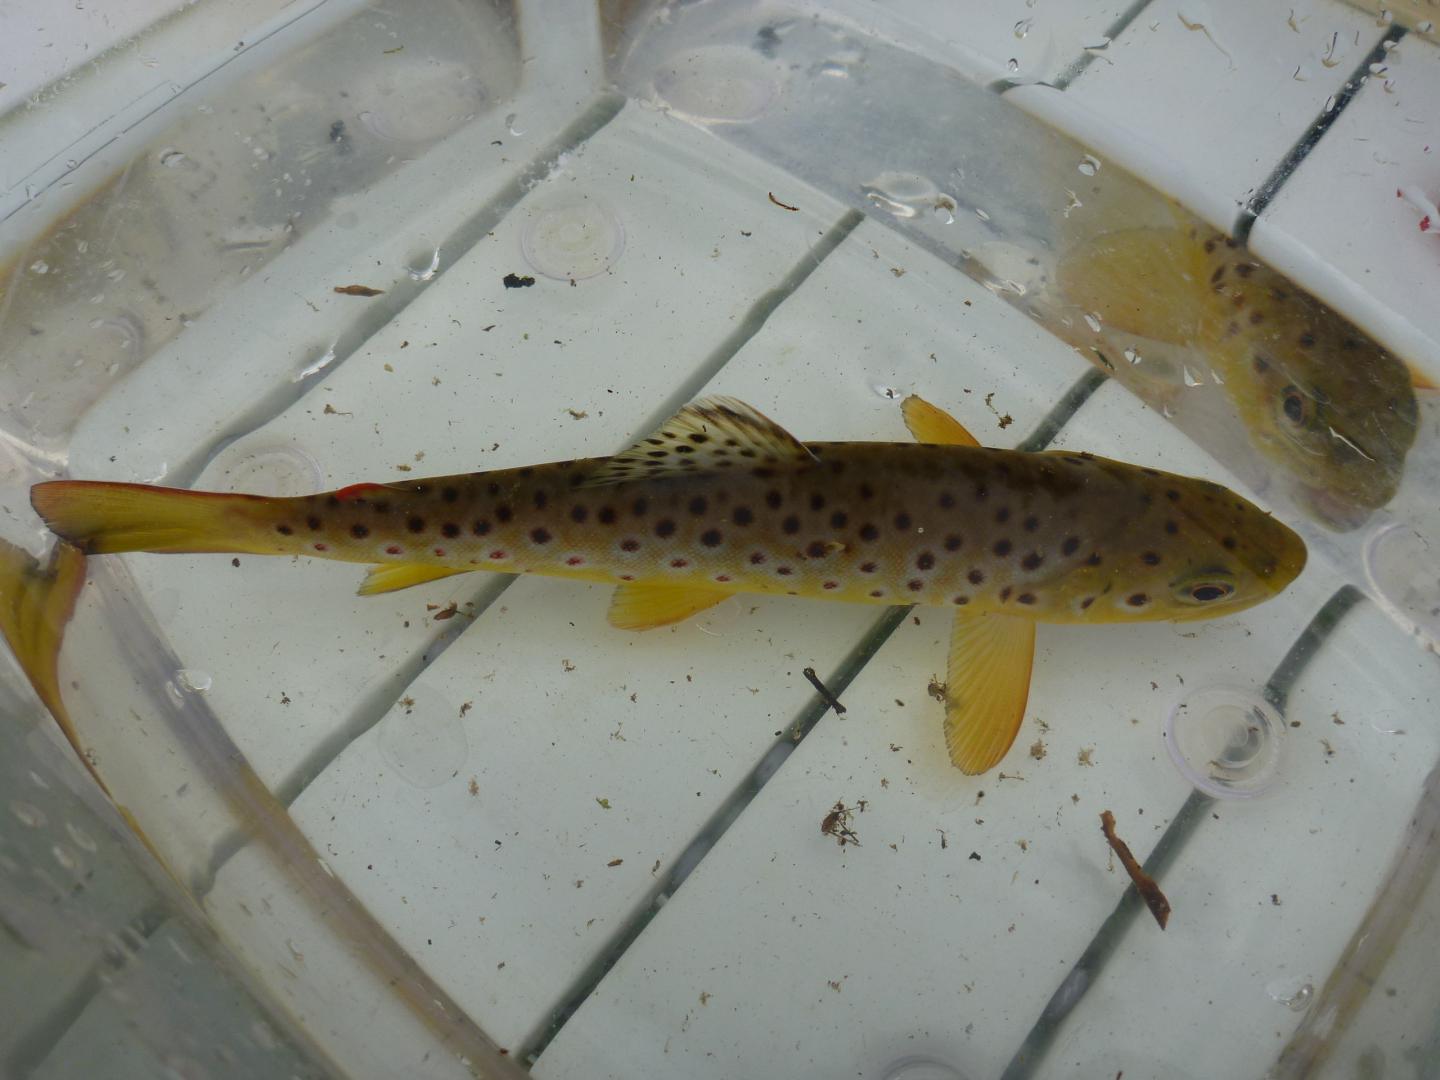 A Brown Trout from the River Hayle in Cornwall, UK